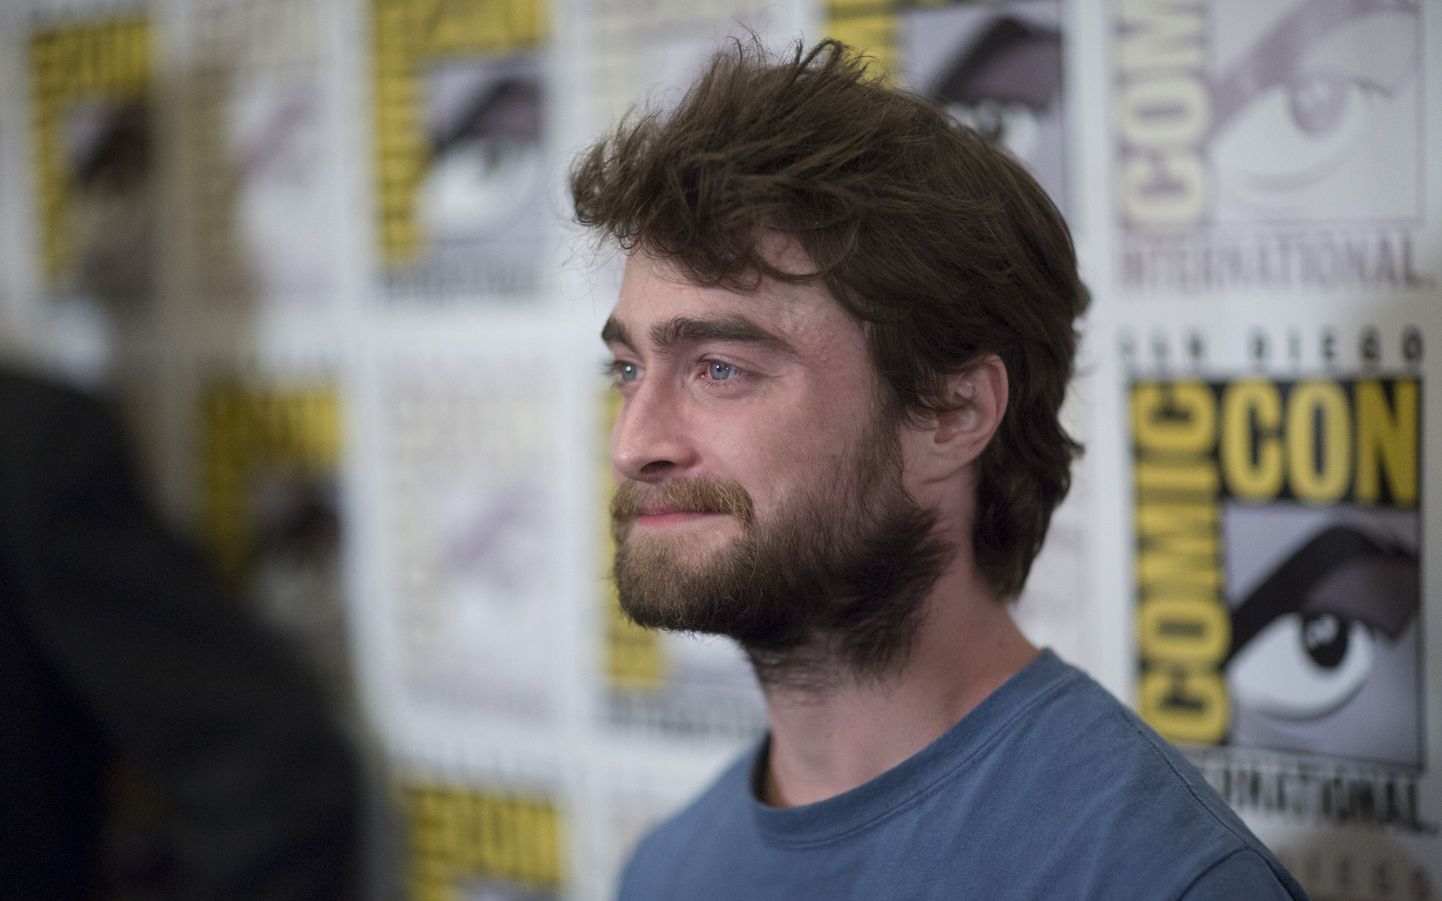 Cast member Daniel Radcliffe poses at a press line for "Victor Frankenstein" during the 2015 Comic-Con International Convention in San Diego, California July 11, 2015. REUTERS/Mario Anzuoni